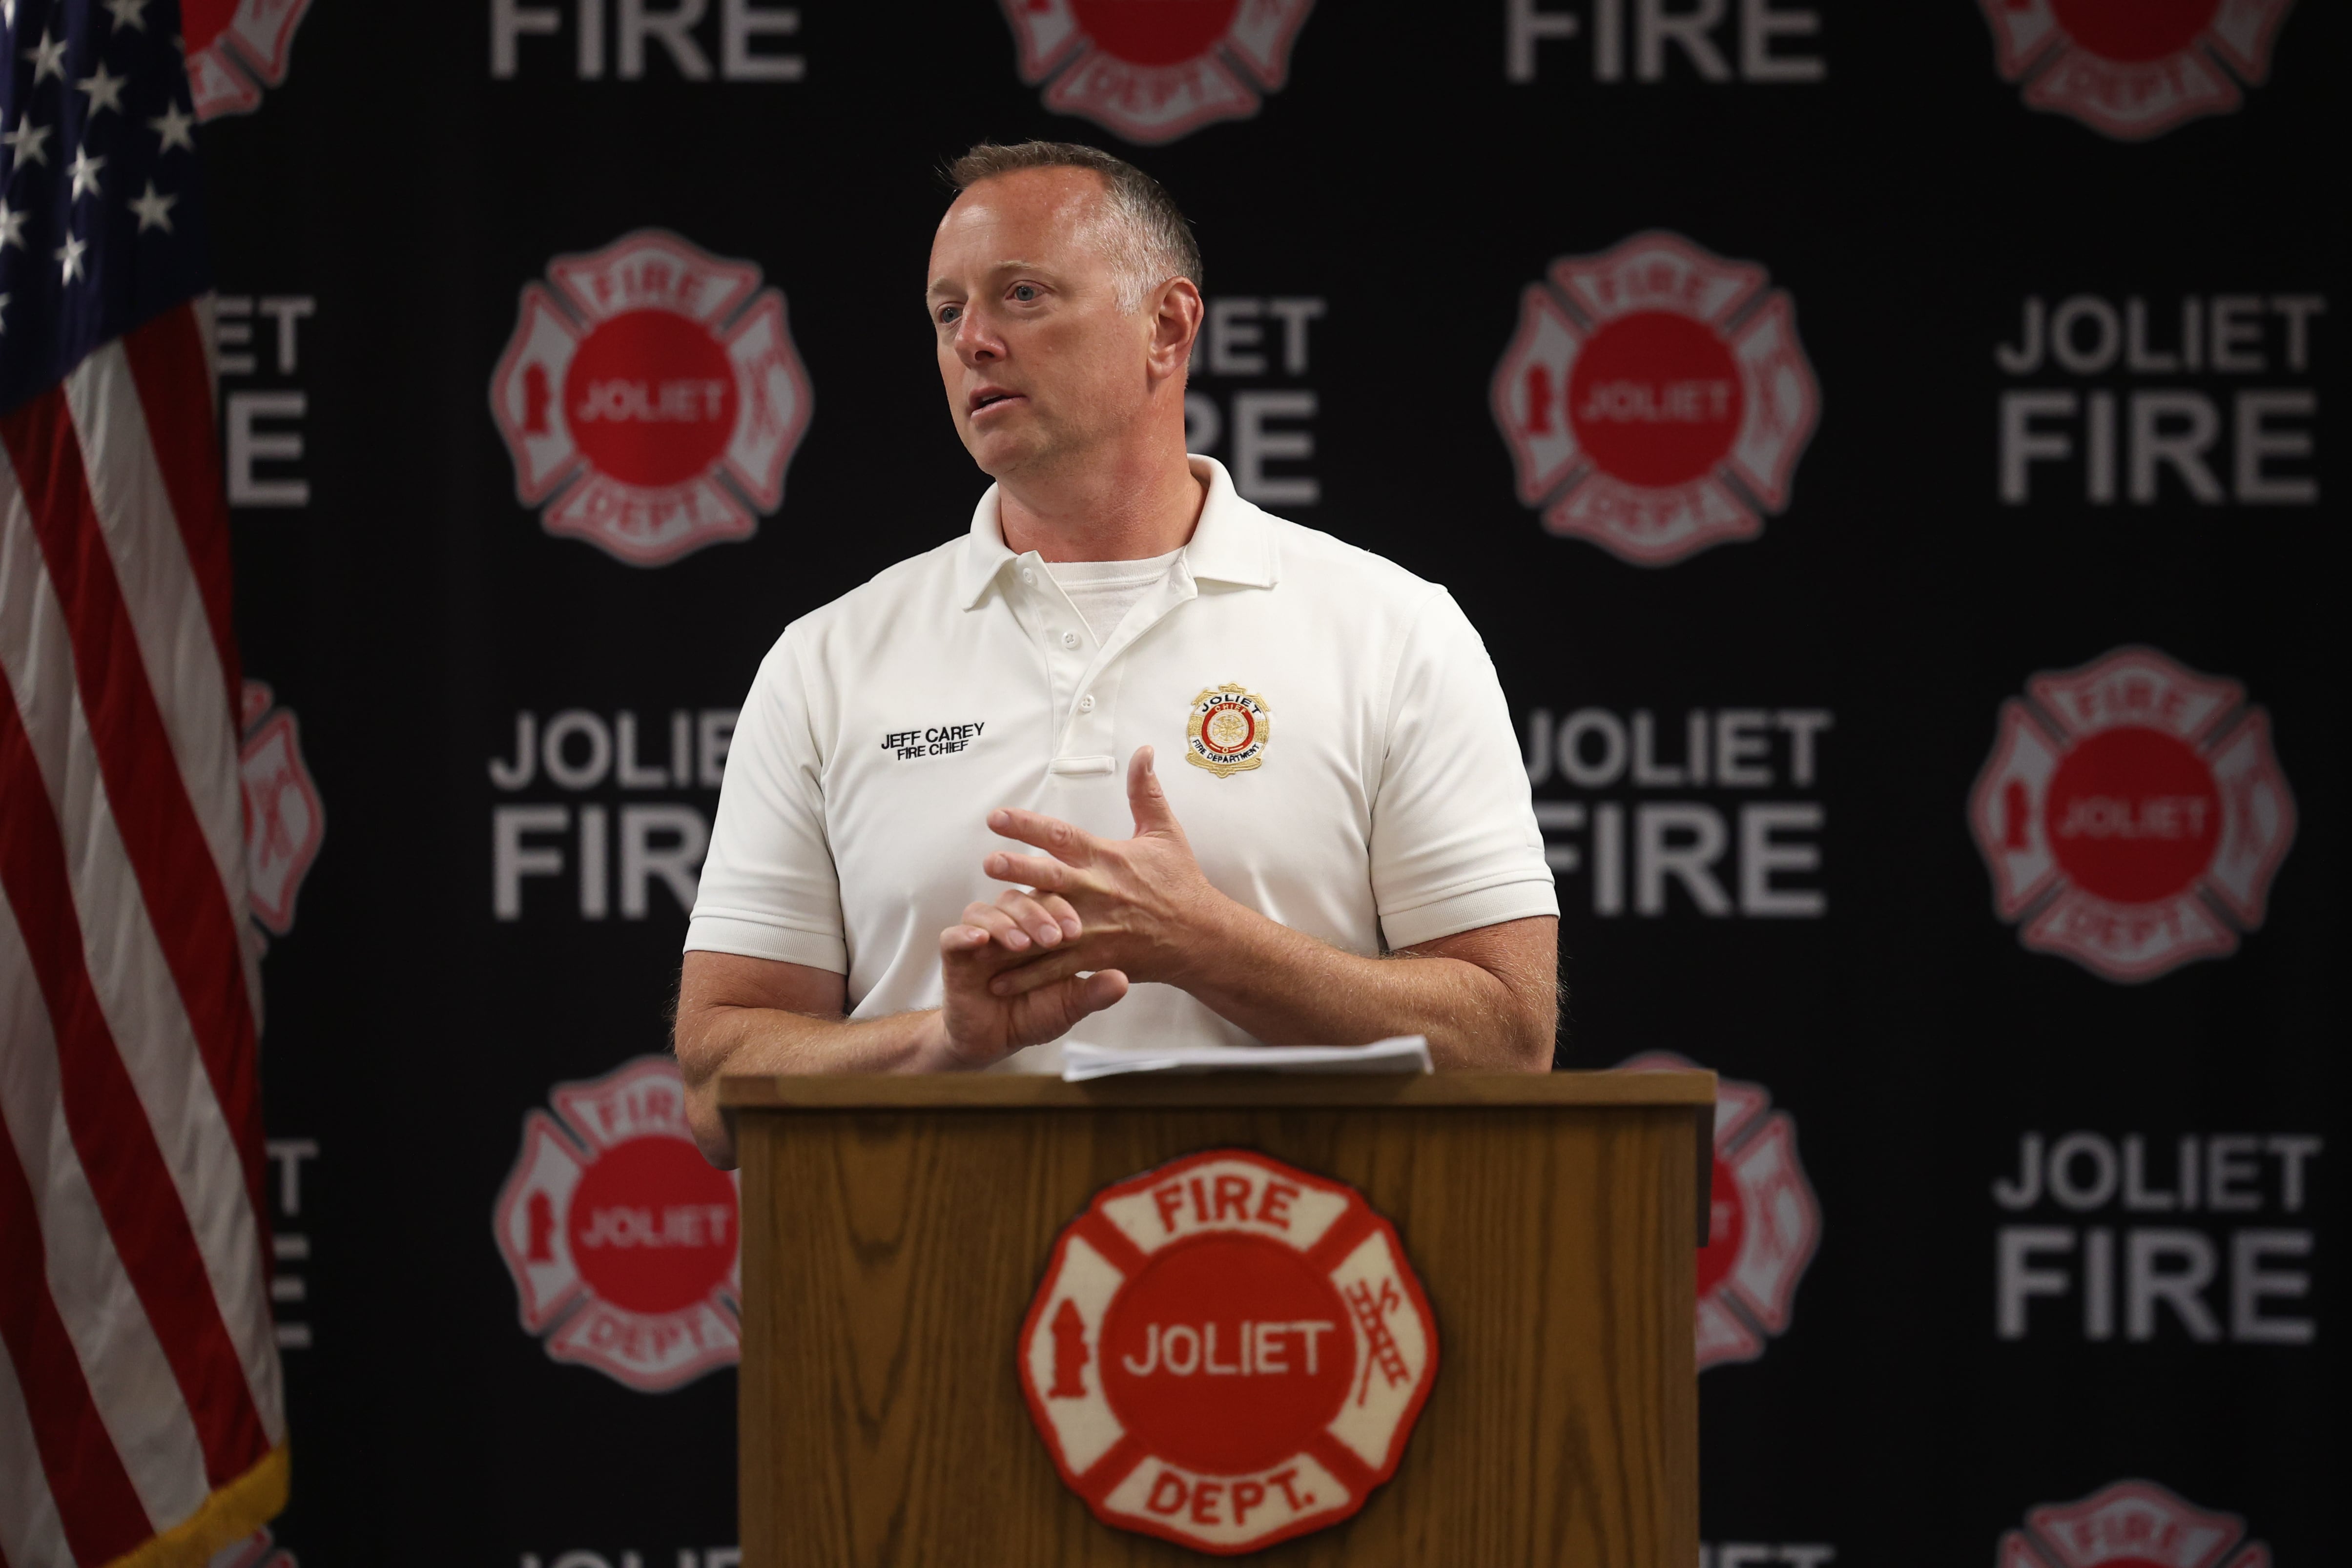 Joliet fire chief urges caution with portable generators in power outages